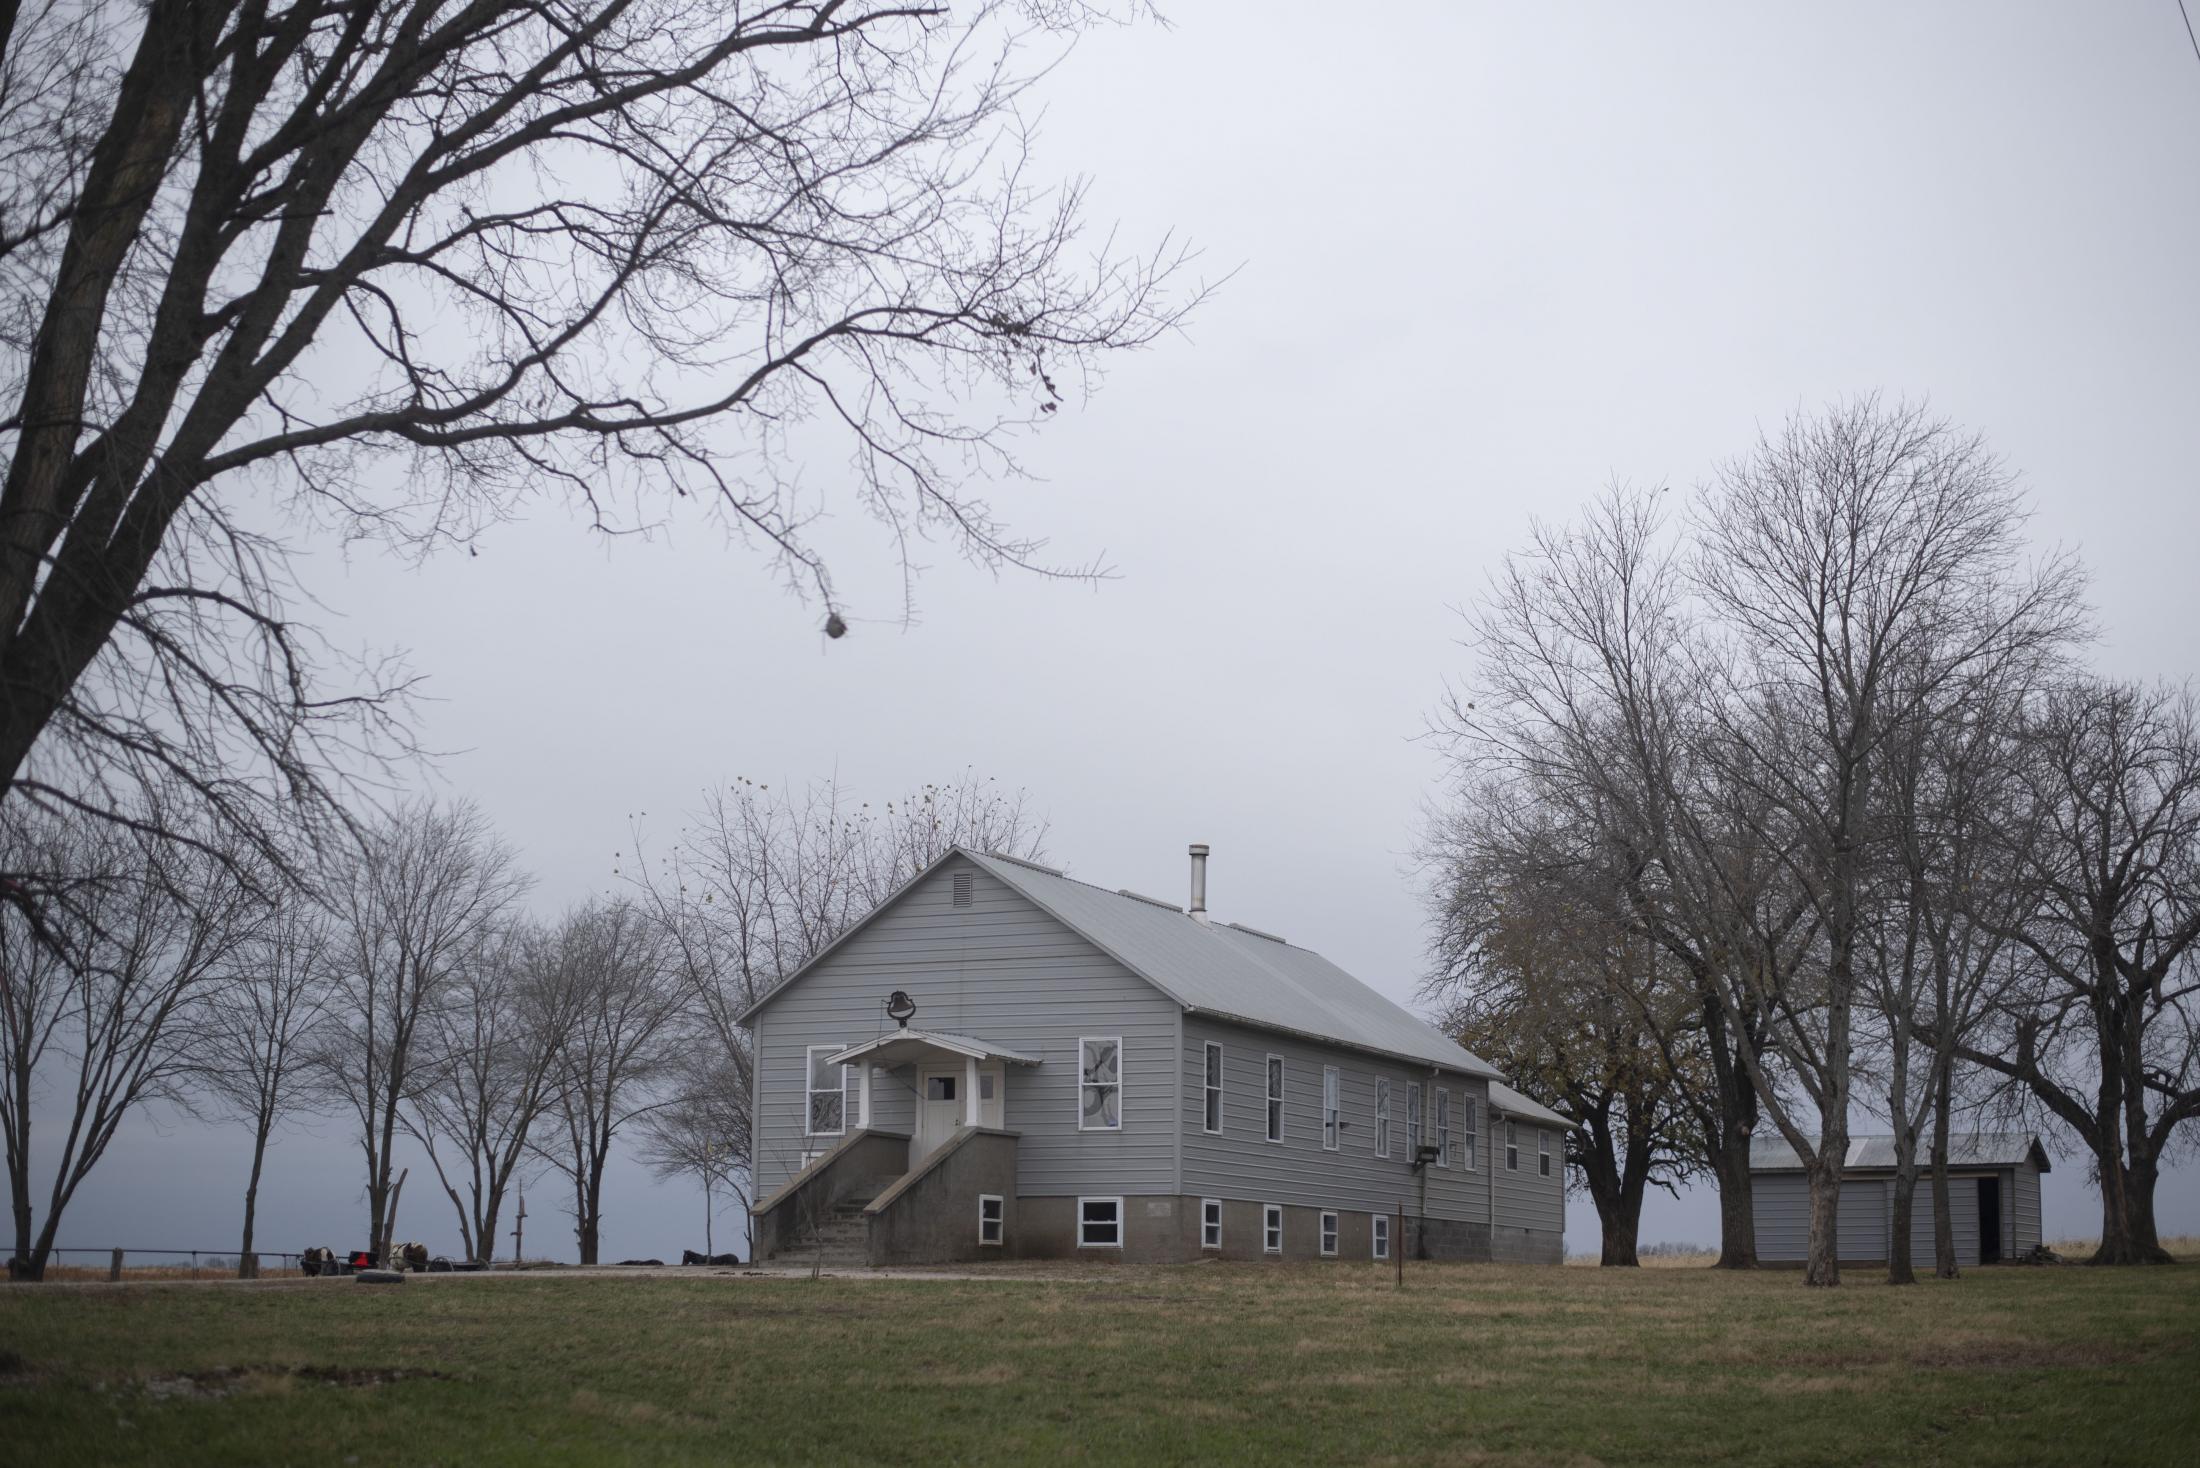 From this earth - A church belonging to a community of Old Order Mennonites...